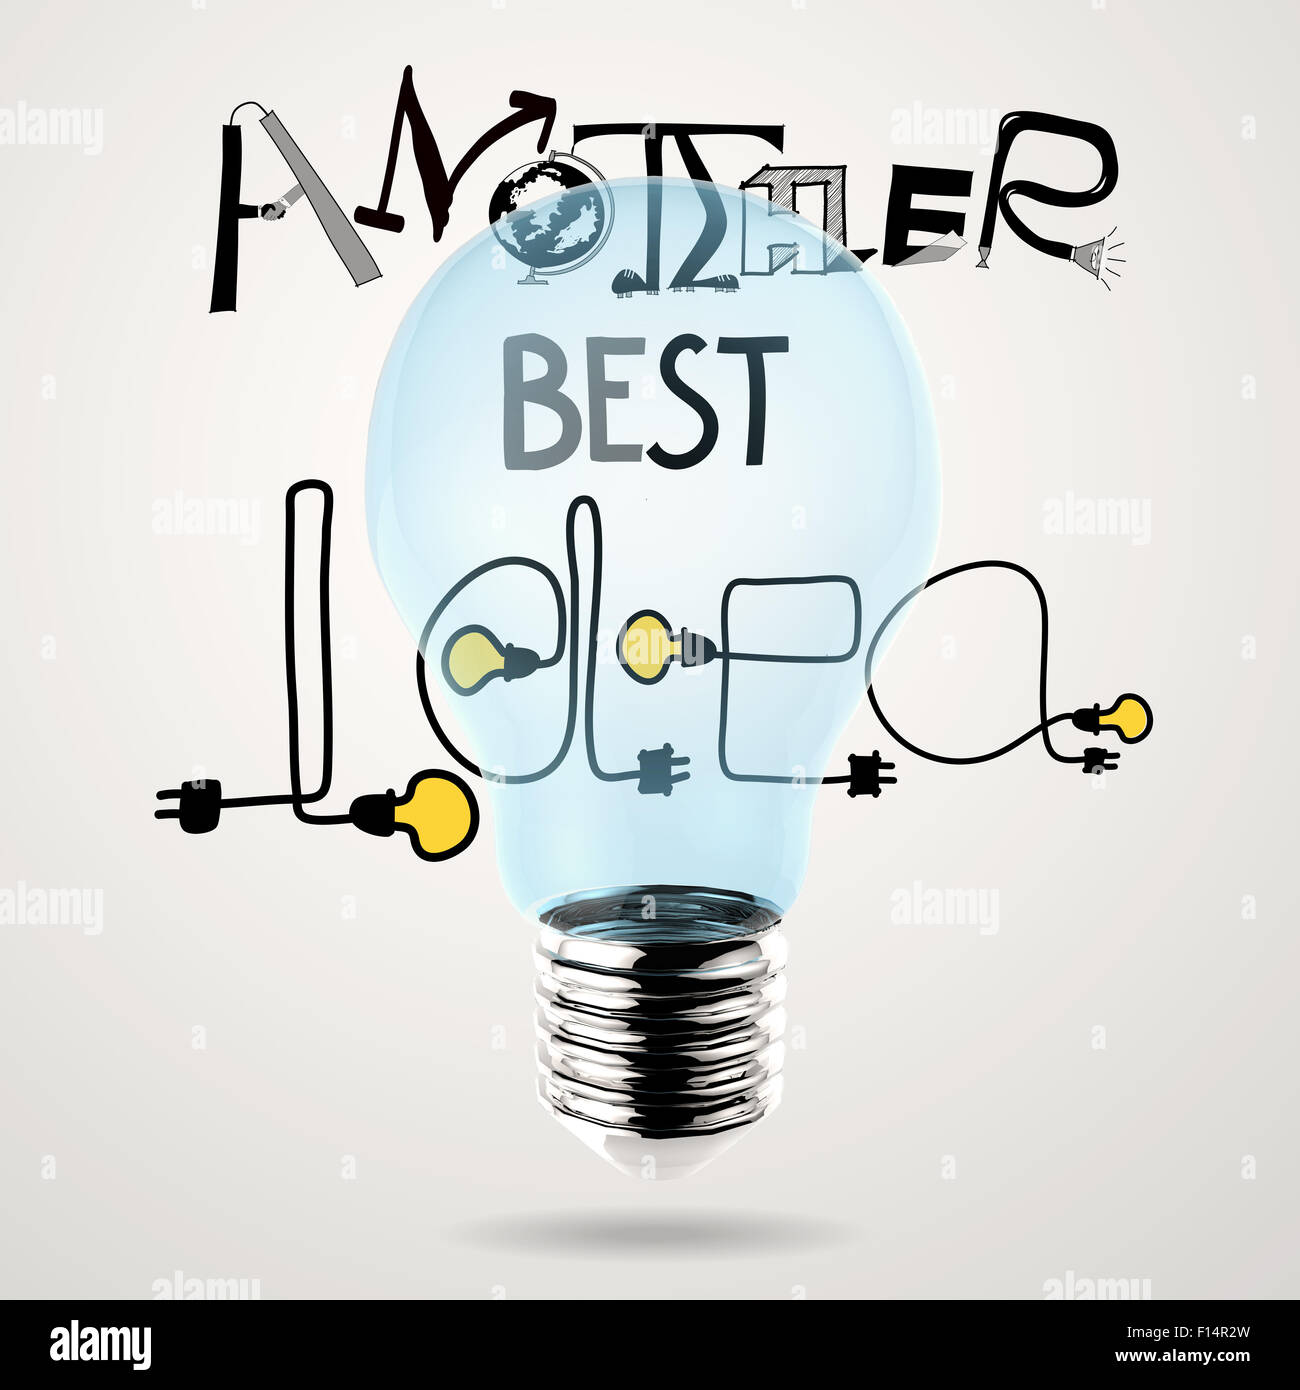 light bulb 3d hand drawn graphic design ANOTHER BEST IDEA word as concept Stock Photo